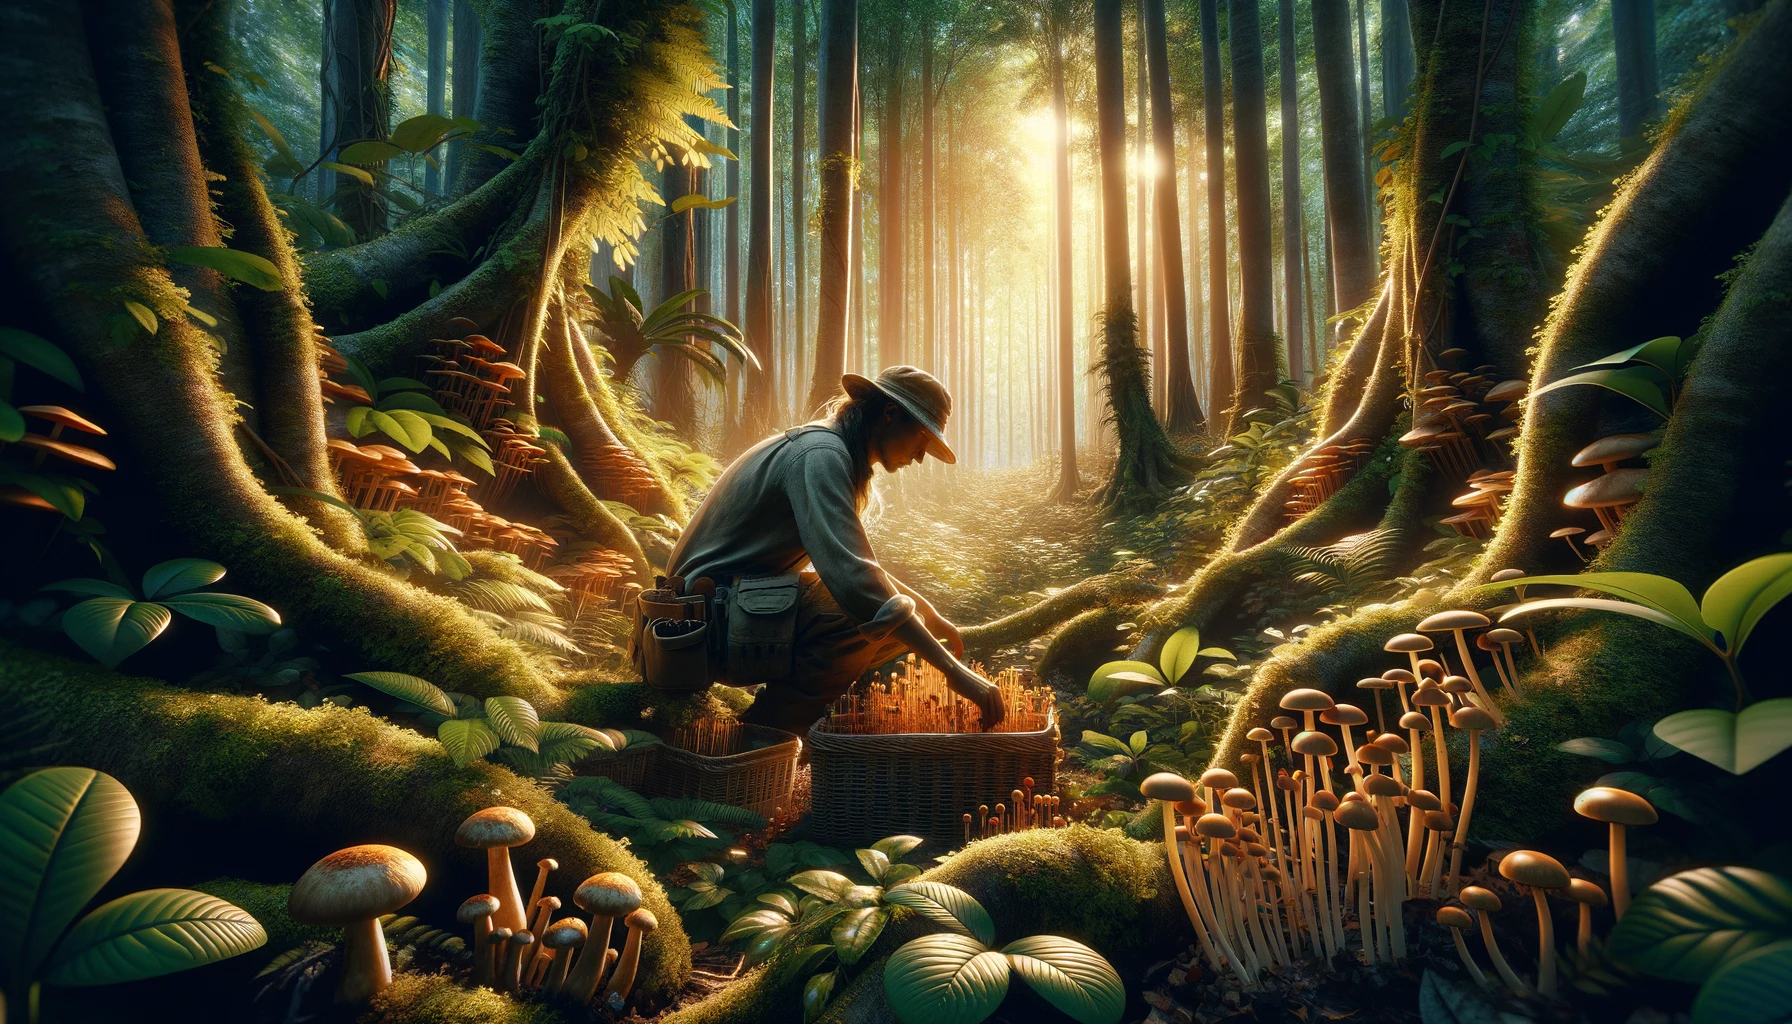 Advanced sustainable harvesting in a thriving forest, depicting a forager using selective harvesting and biodegradable materials among diverse plant life, showcasing respectful interaction with the ecosystem under warm, inviting light, symbolizing the bond between humans and earth